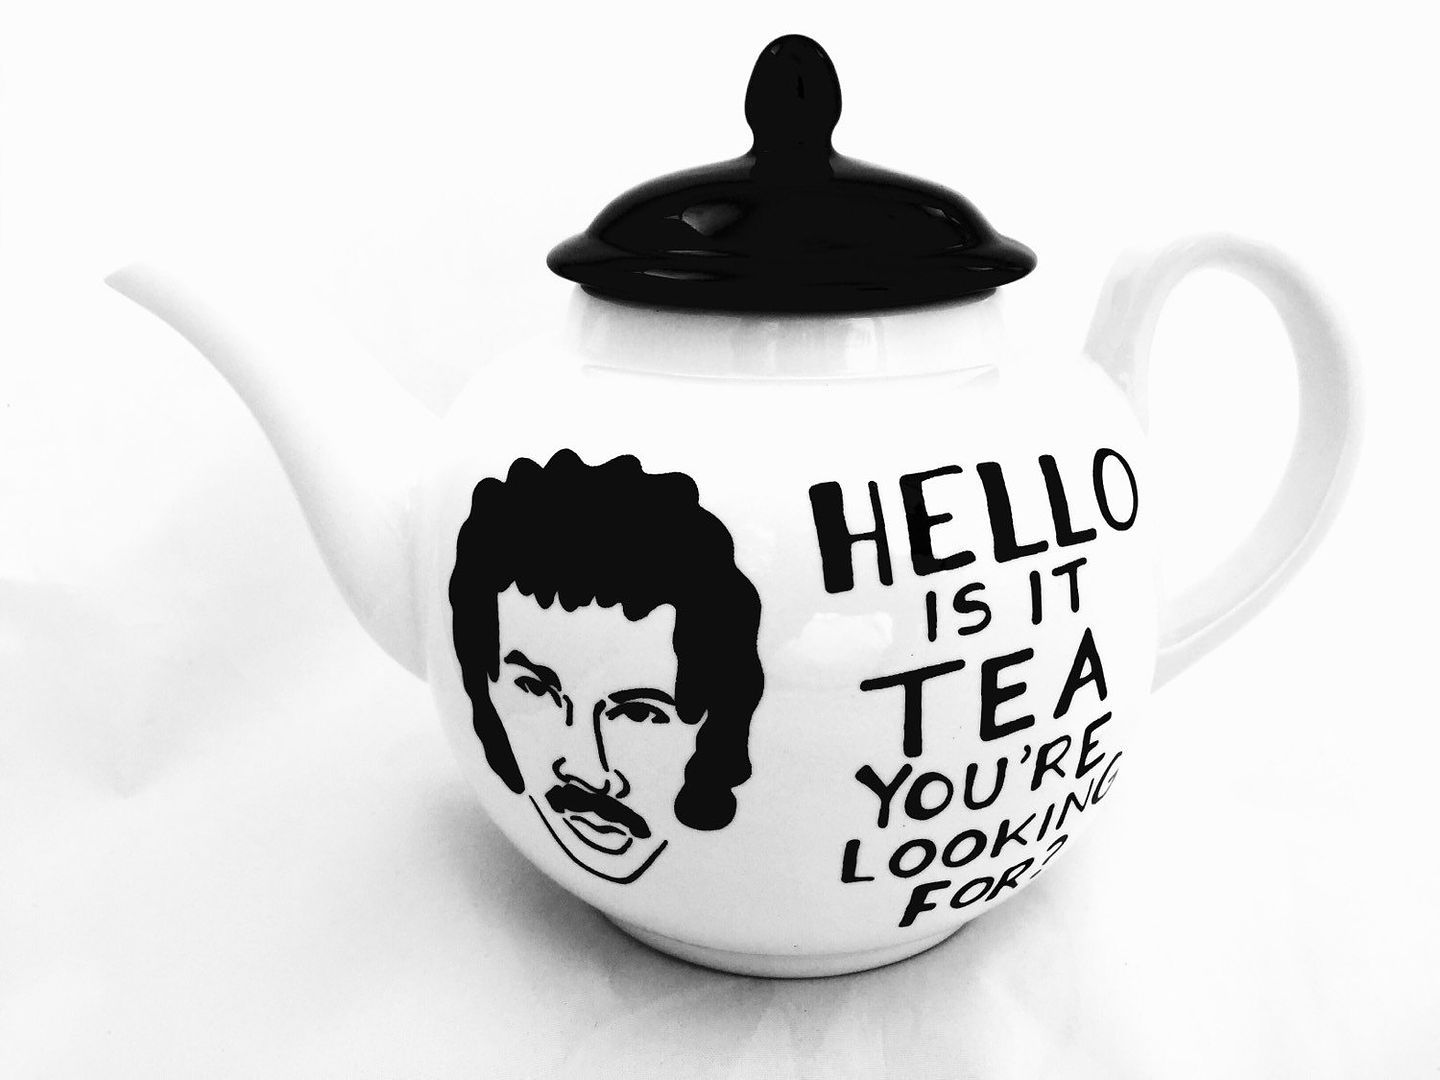 Hello, is it tea you're looking for tea pot by Mugoos on Etsy